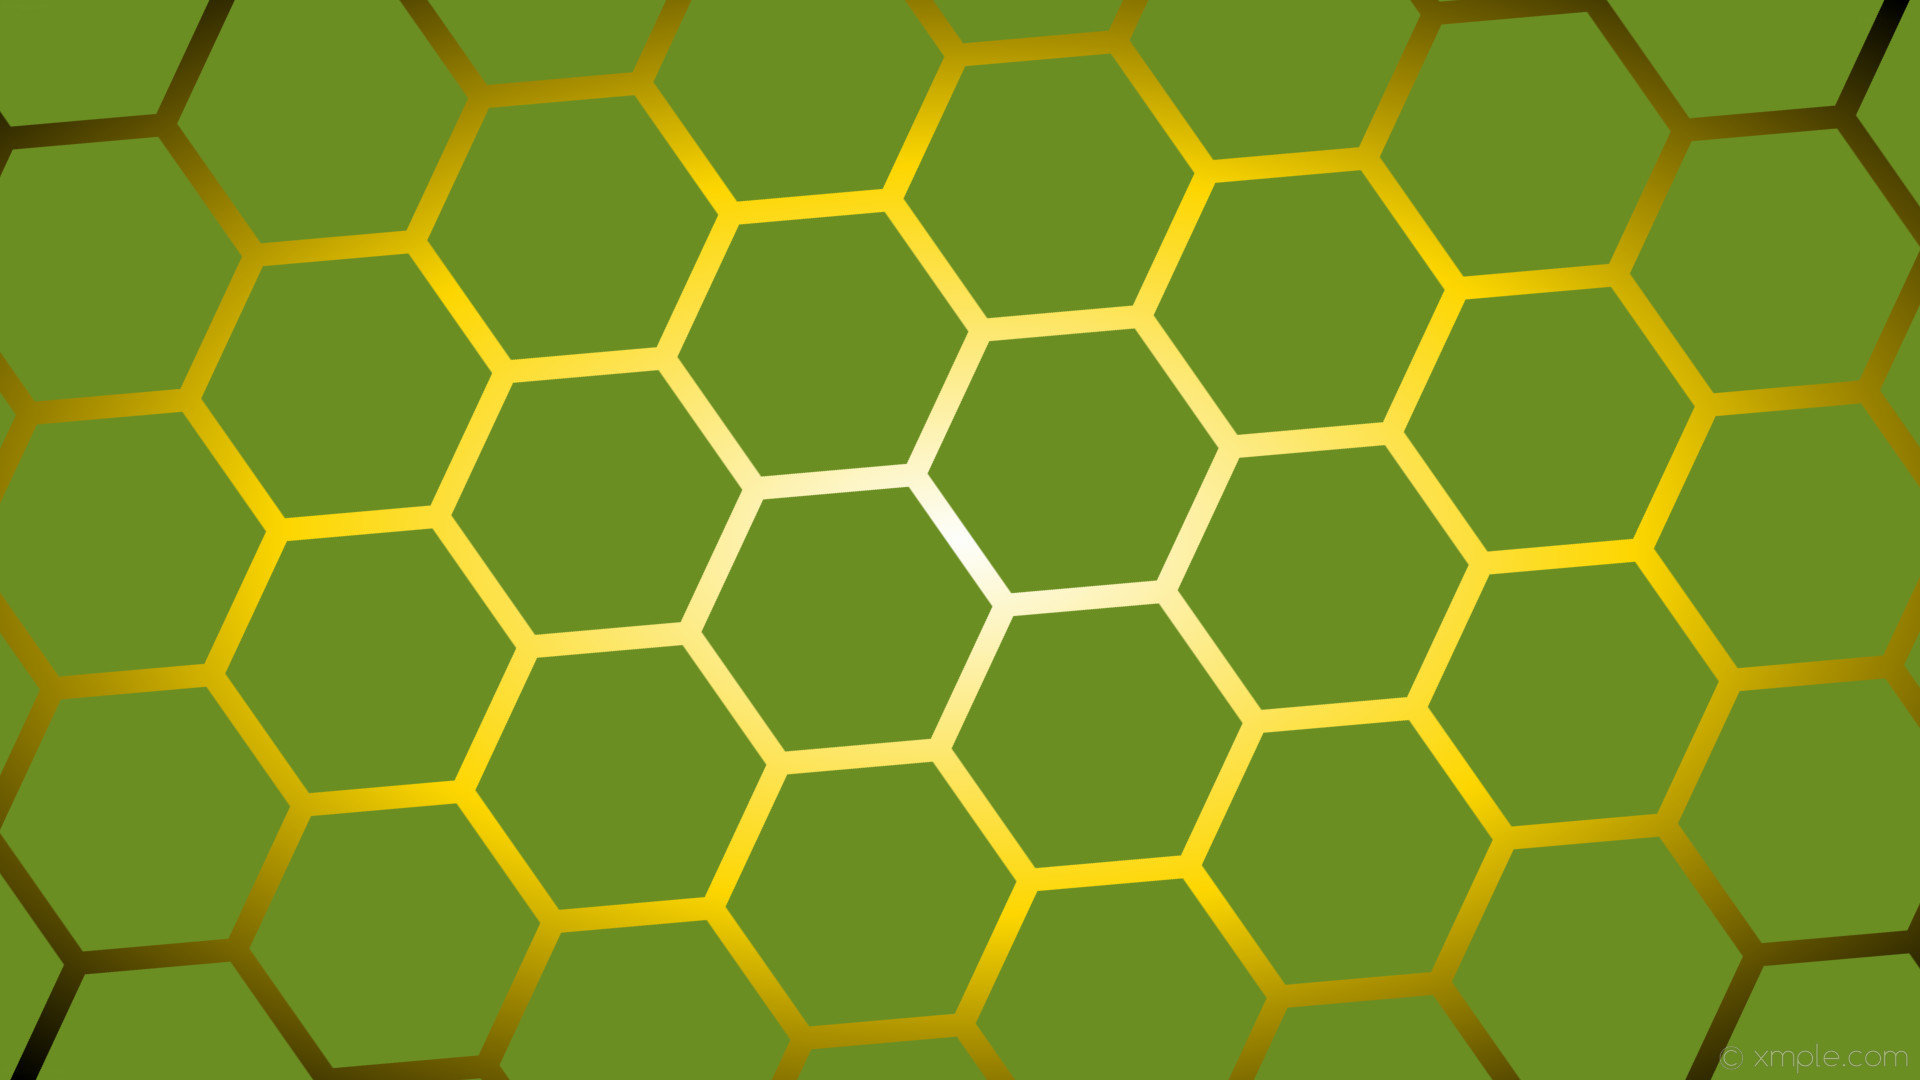 green and gold wallpaper,green,yellow,pattern,symmetry,design